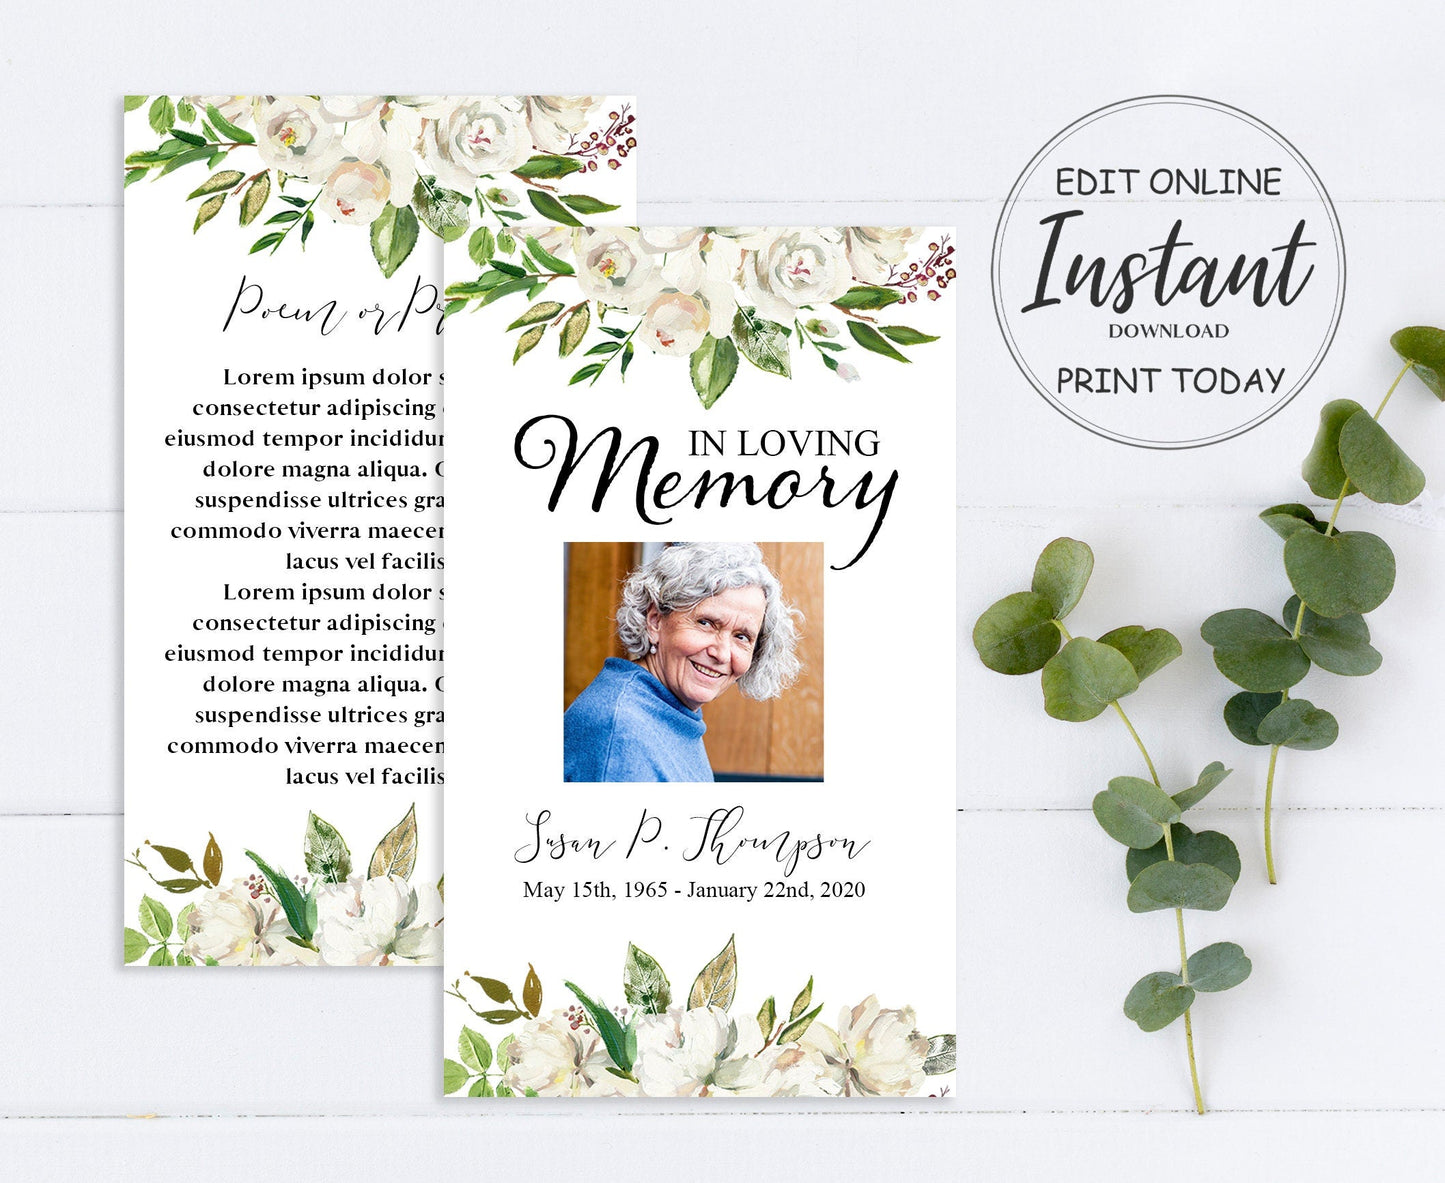 greenery and white roses adorn this obituary prayer card template